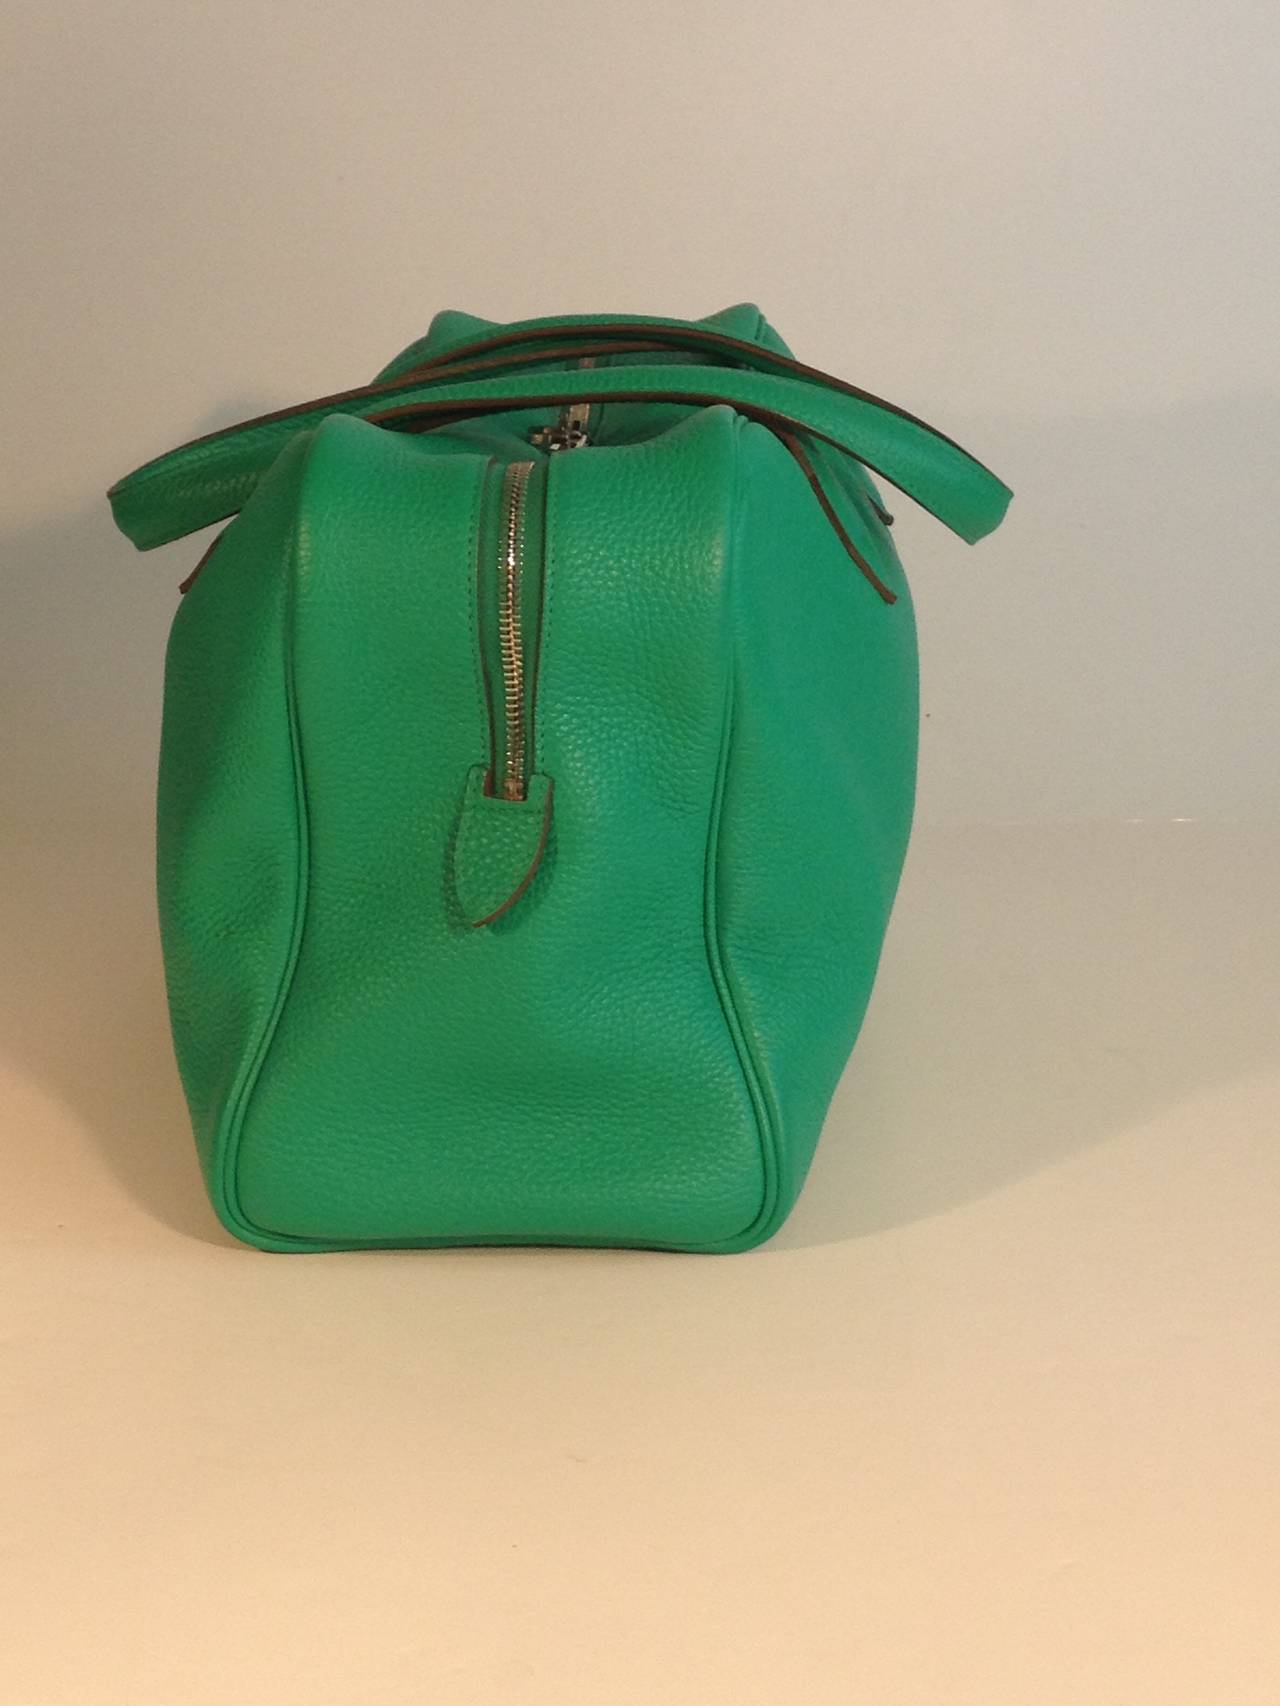 Introduced in the Spring 2007 collection, the Victoria II handbag is beautifully lightweight and perfectly shaped to be your new favorite day bag. It is crafted from gorgeous pebbled leather in a deep and super saturated emerald green, perfect for